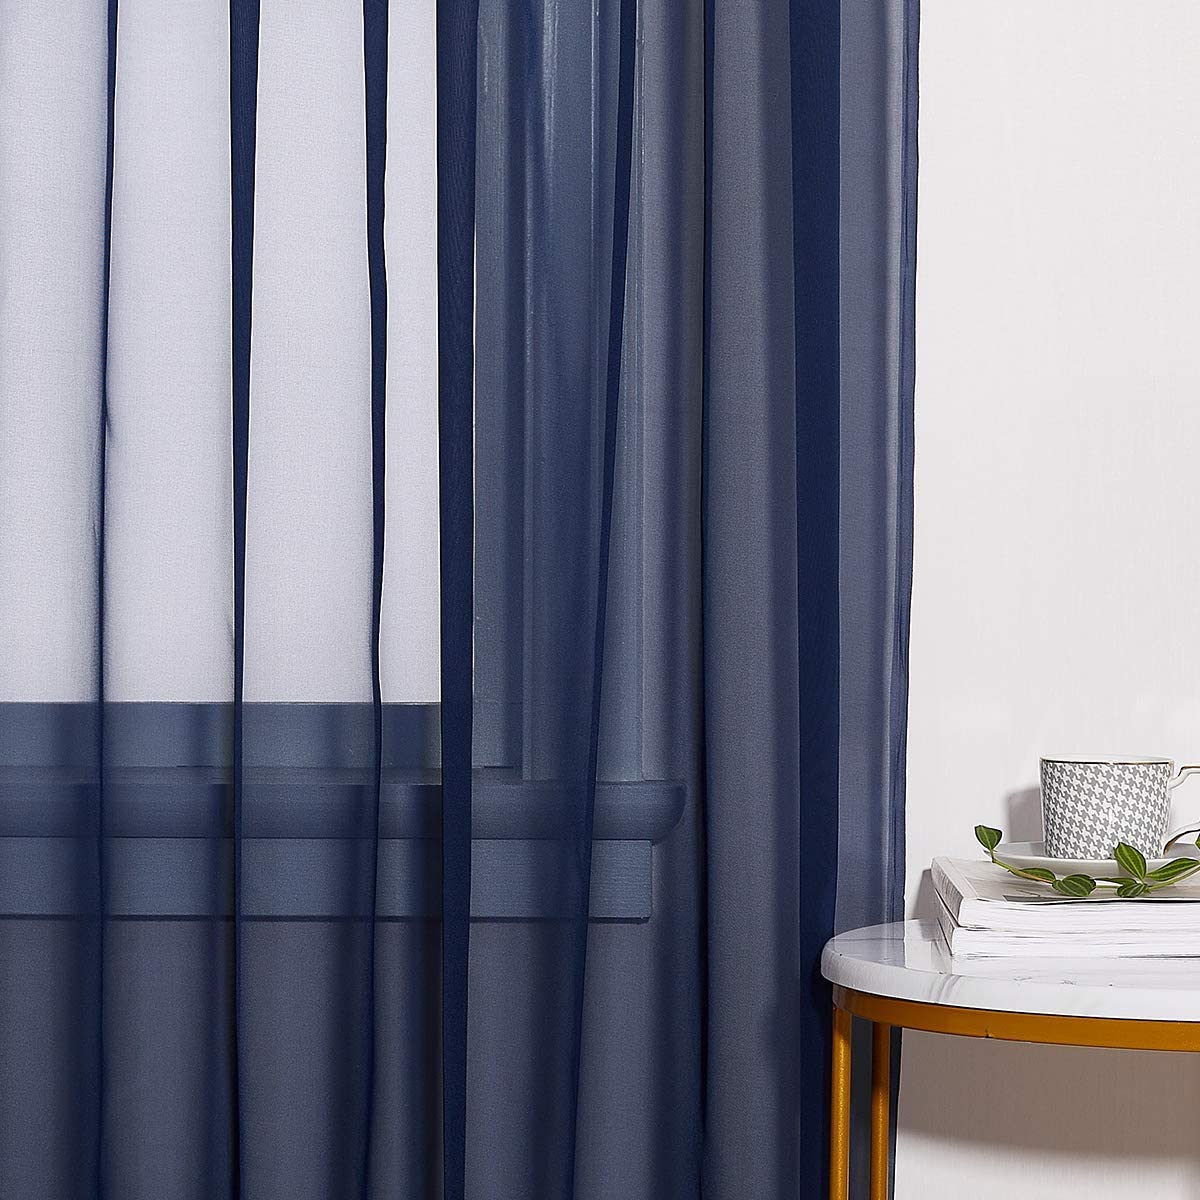 Rod Pocket Sheer Privacy Voile Window Curtains For Bedroom And Living Room 2 Pairs KGORGE Store